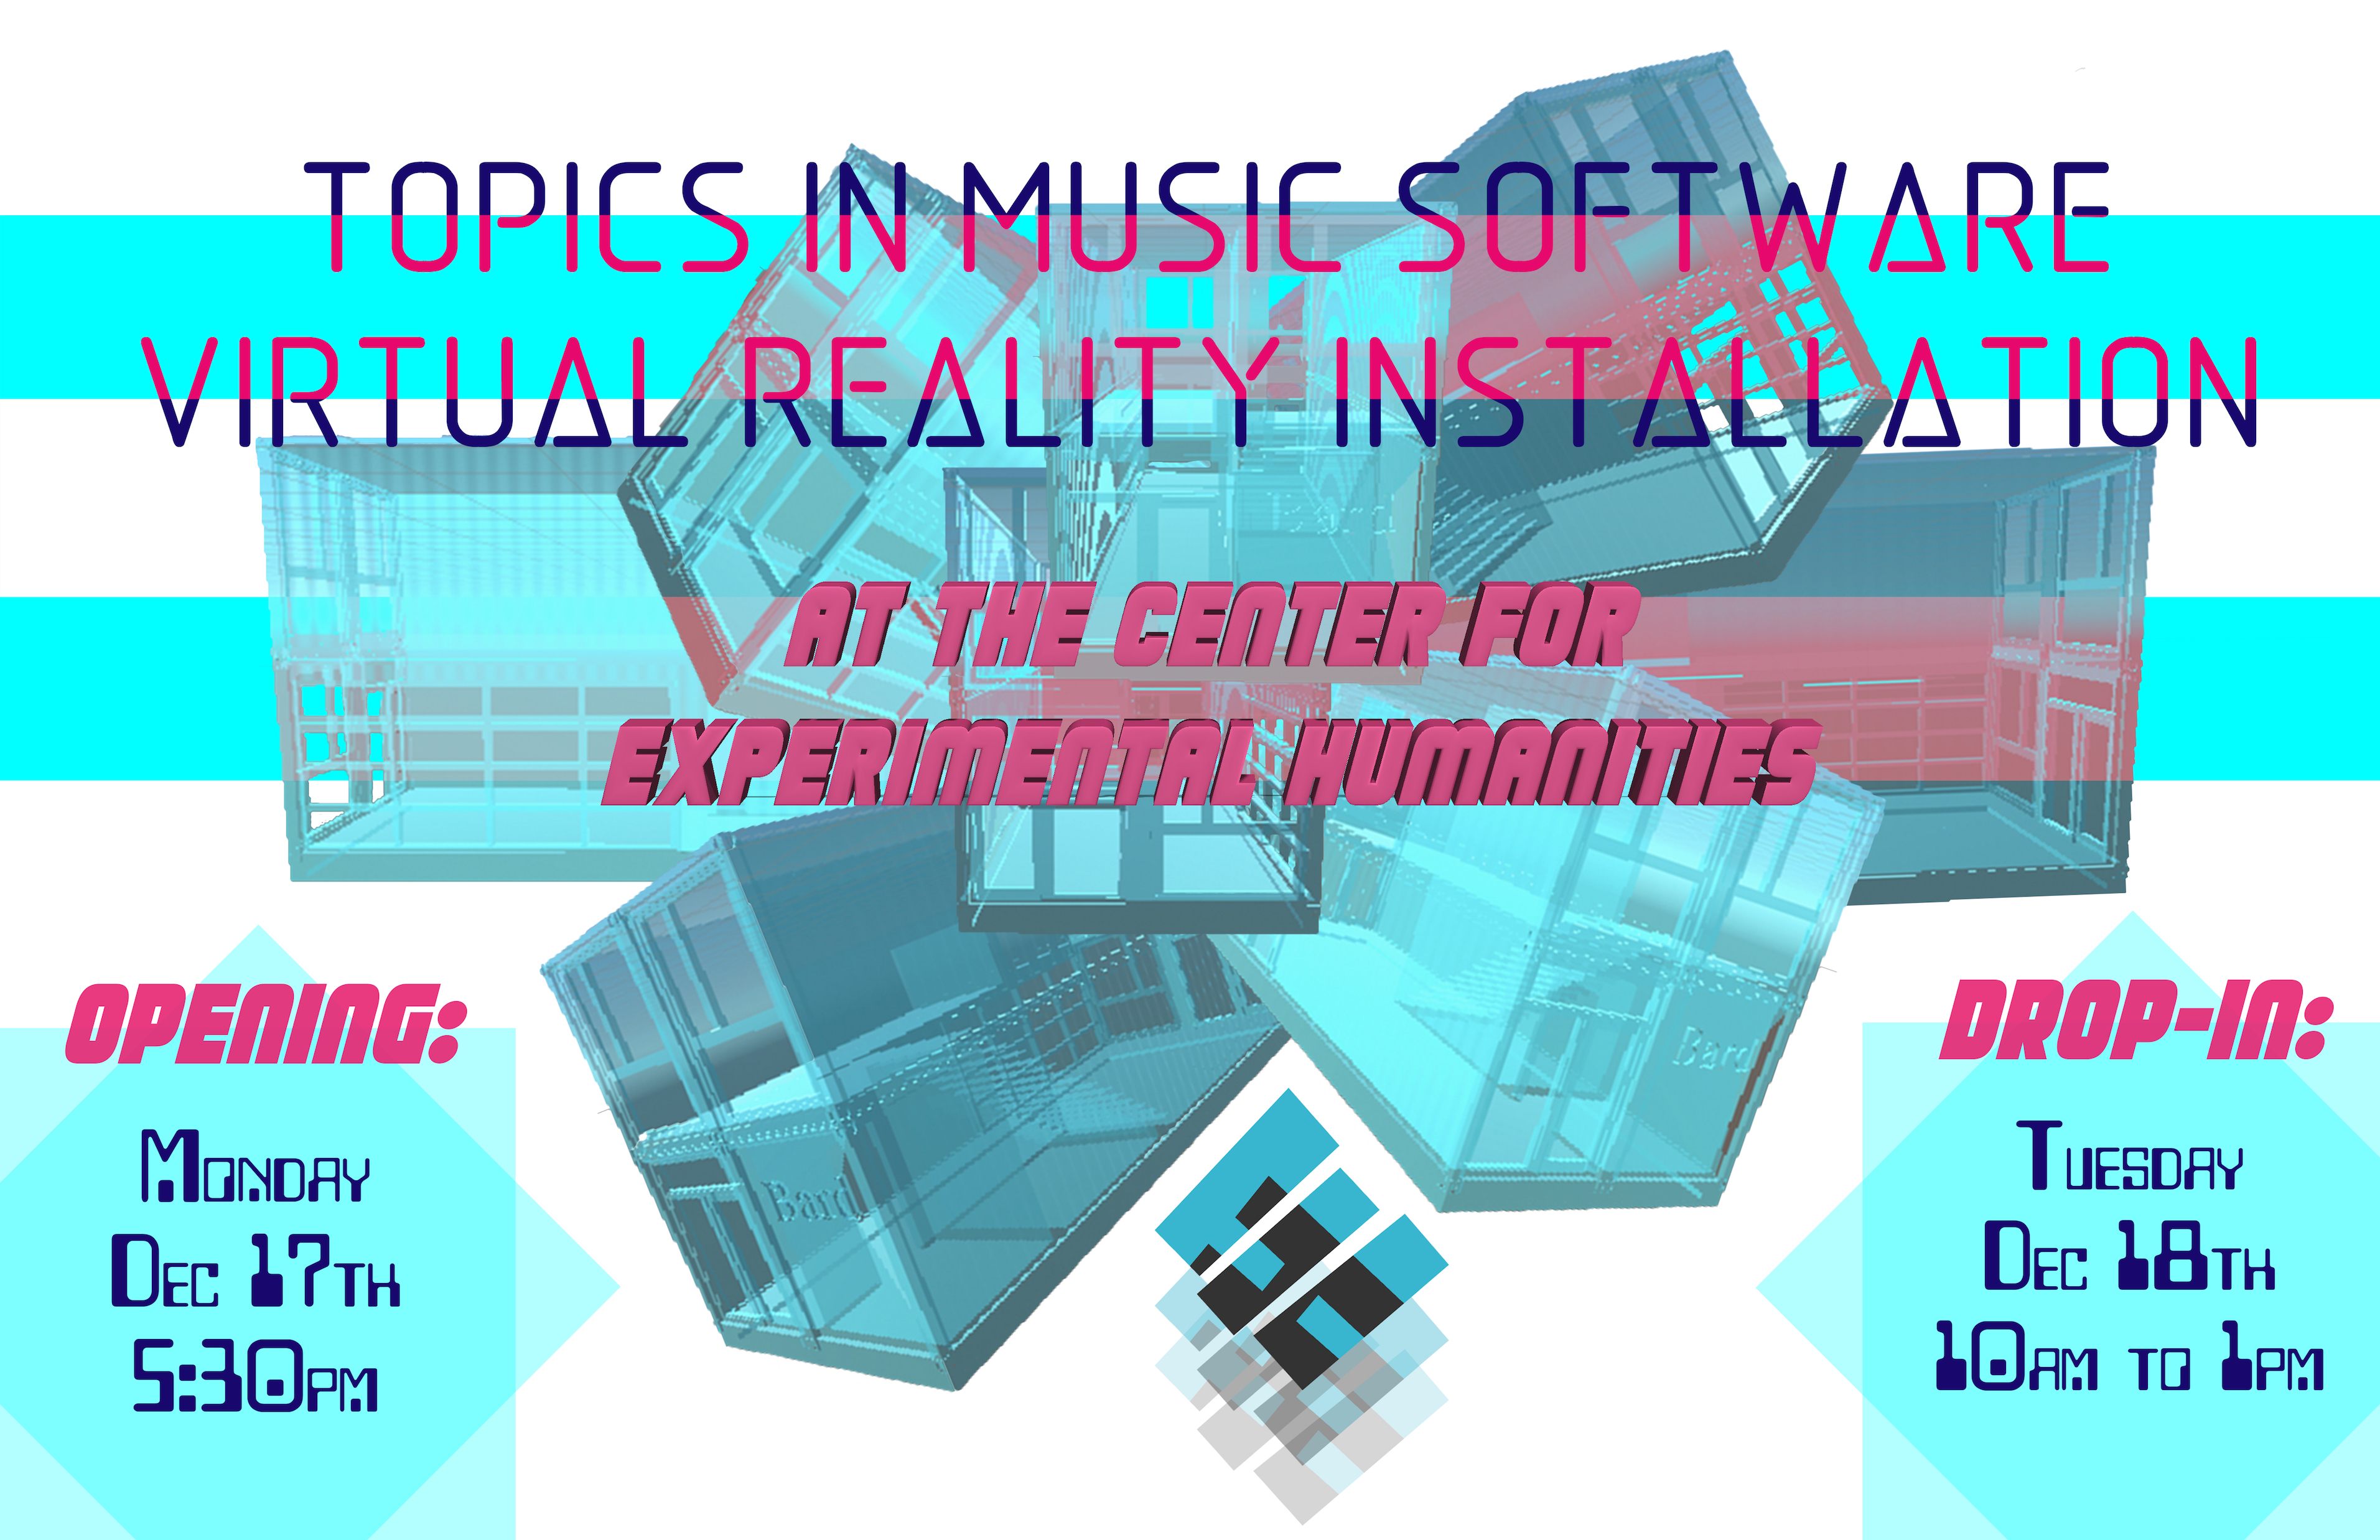 Topics in Music Software: Virtual Reality Installation